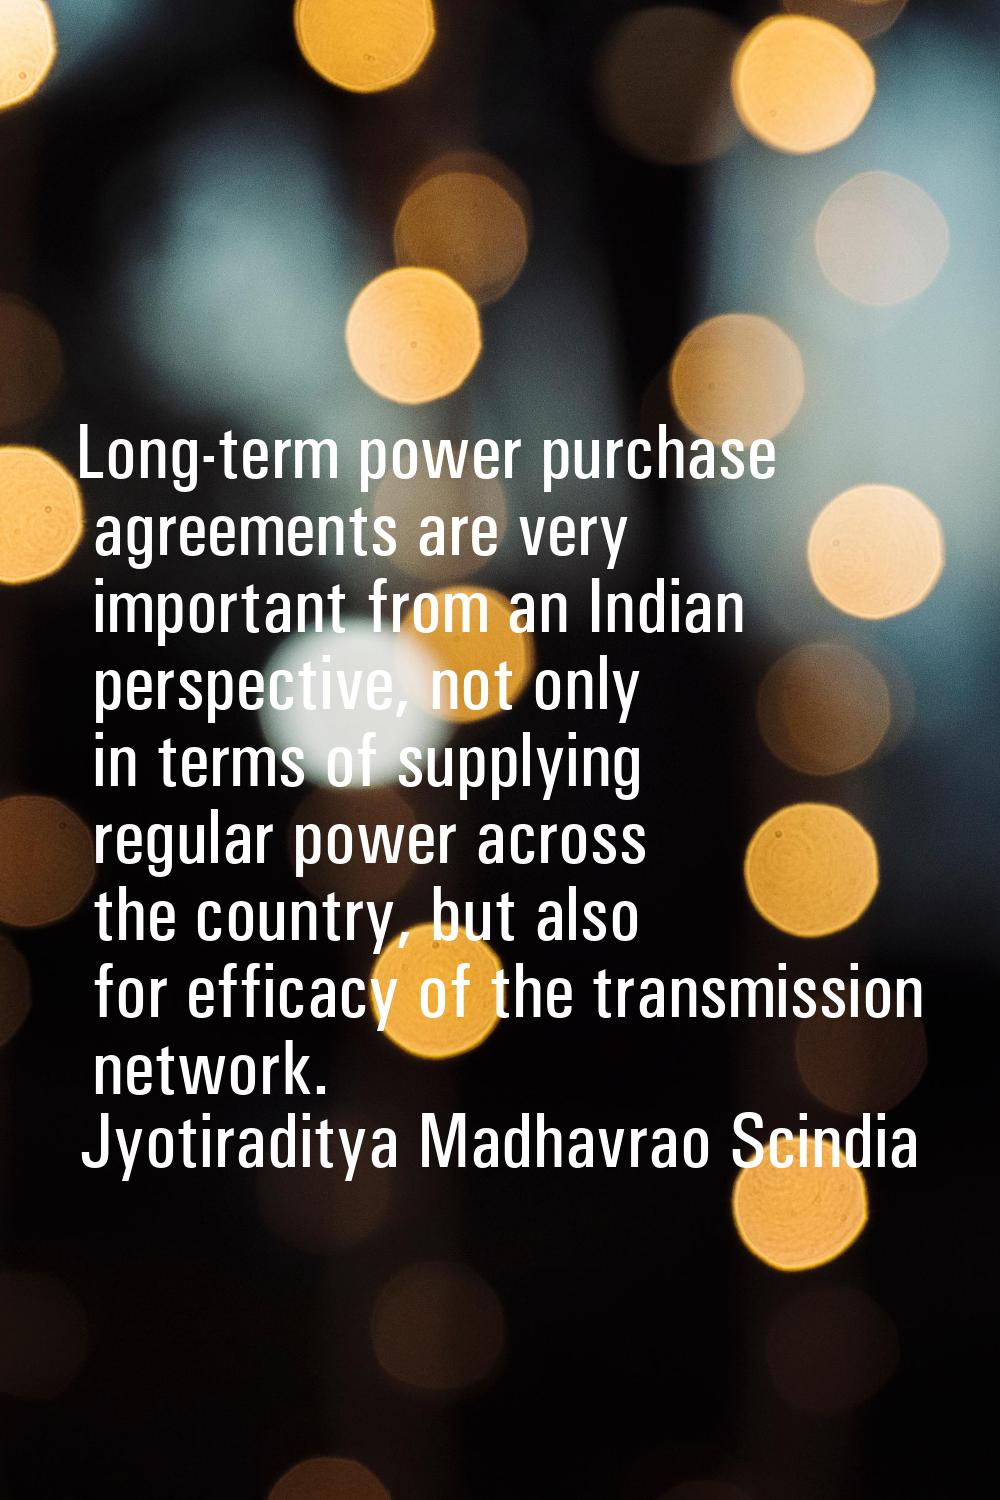 Long-term power purchase agreements are very important from an Indian perspective, not only in term